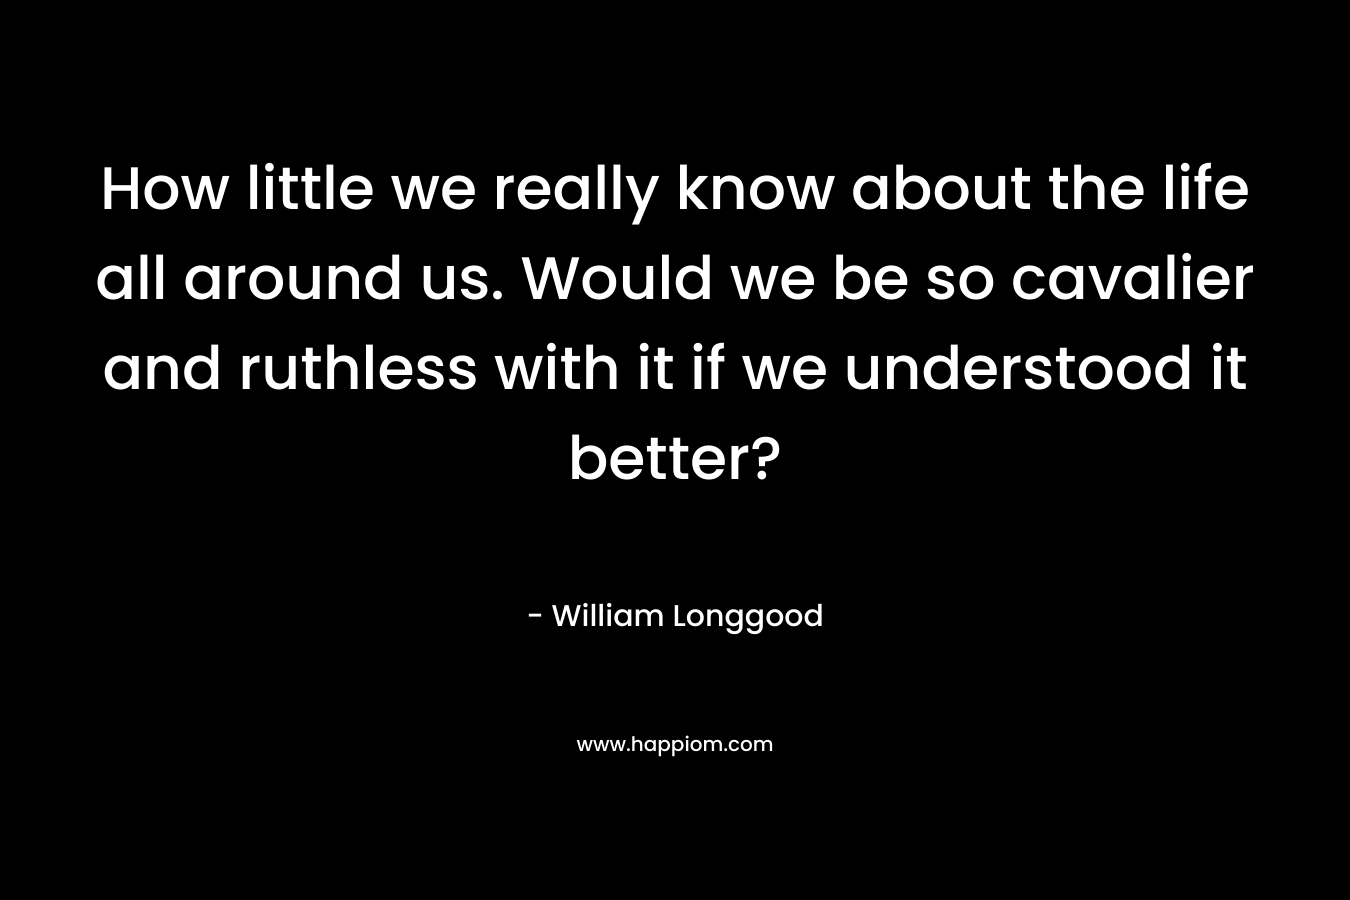 How little we really know about the life all around us. Would we be so cavalier and ruthless with it if we understood it better? – William Longgood